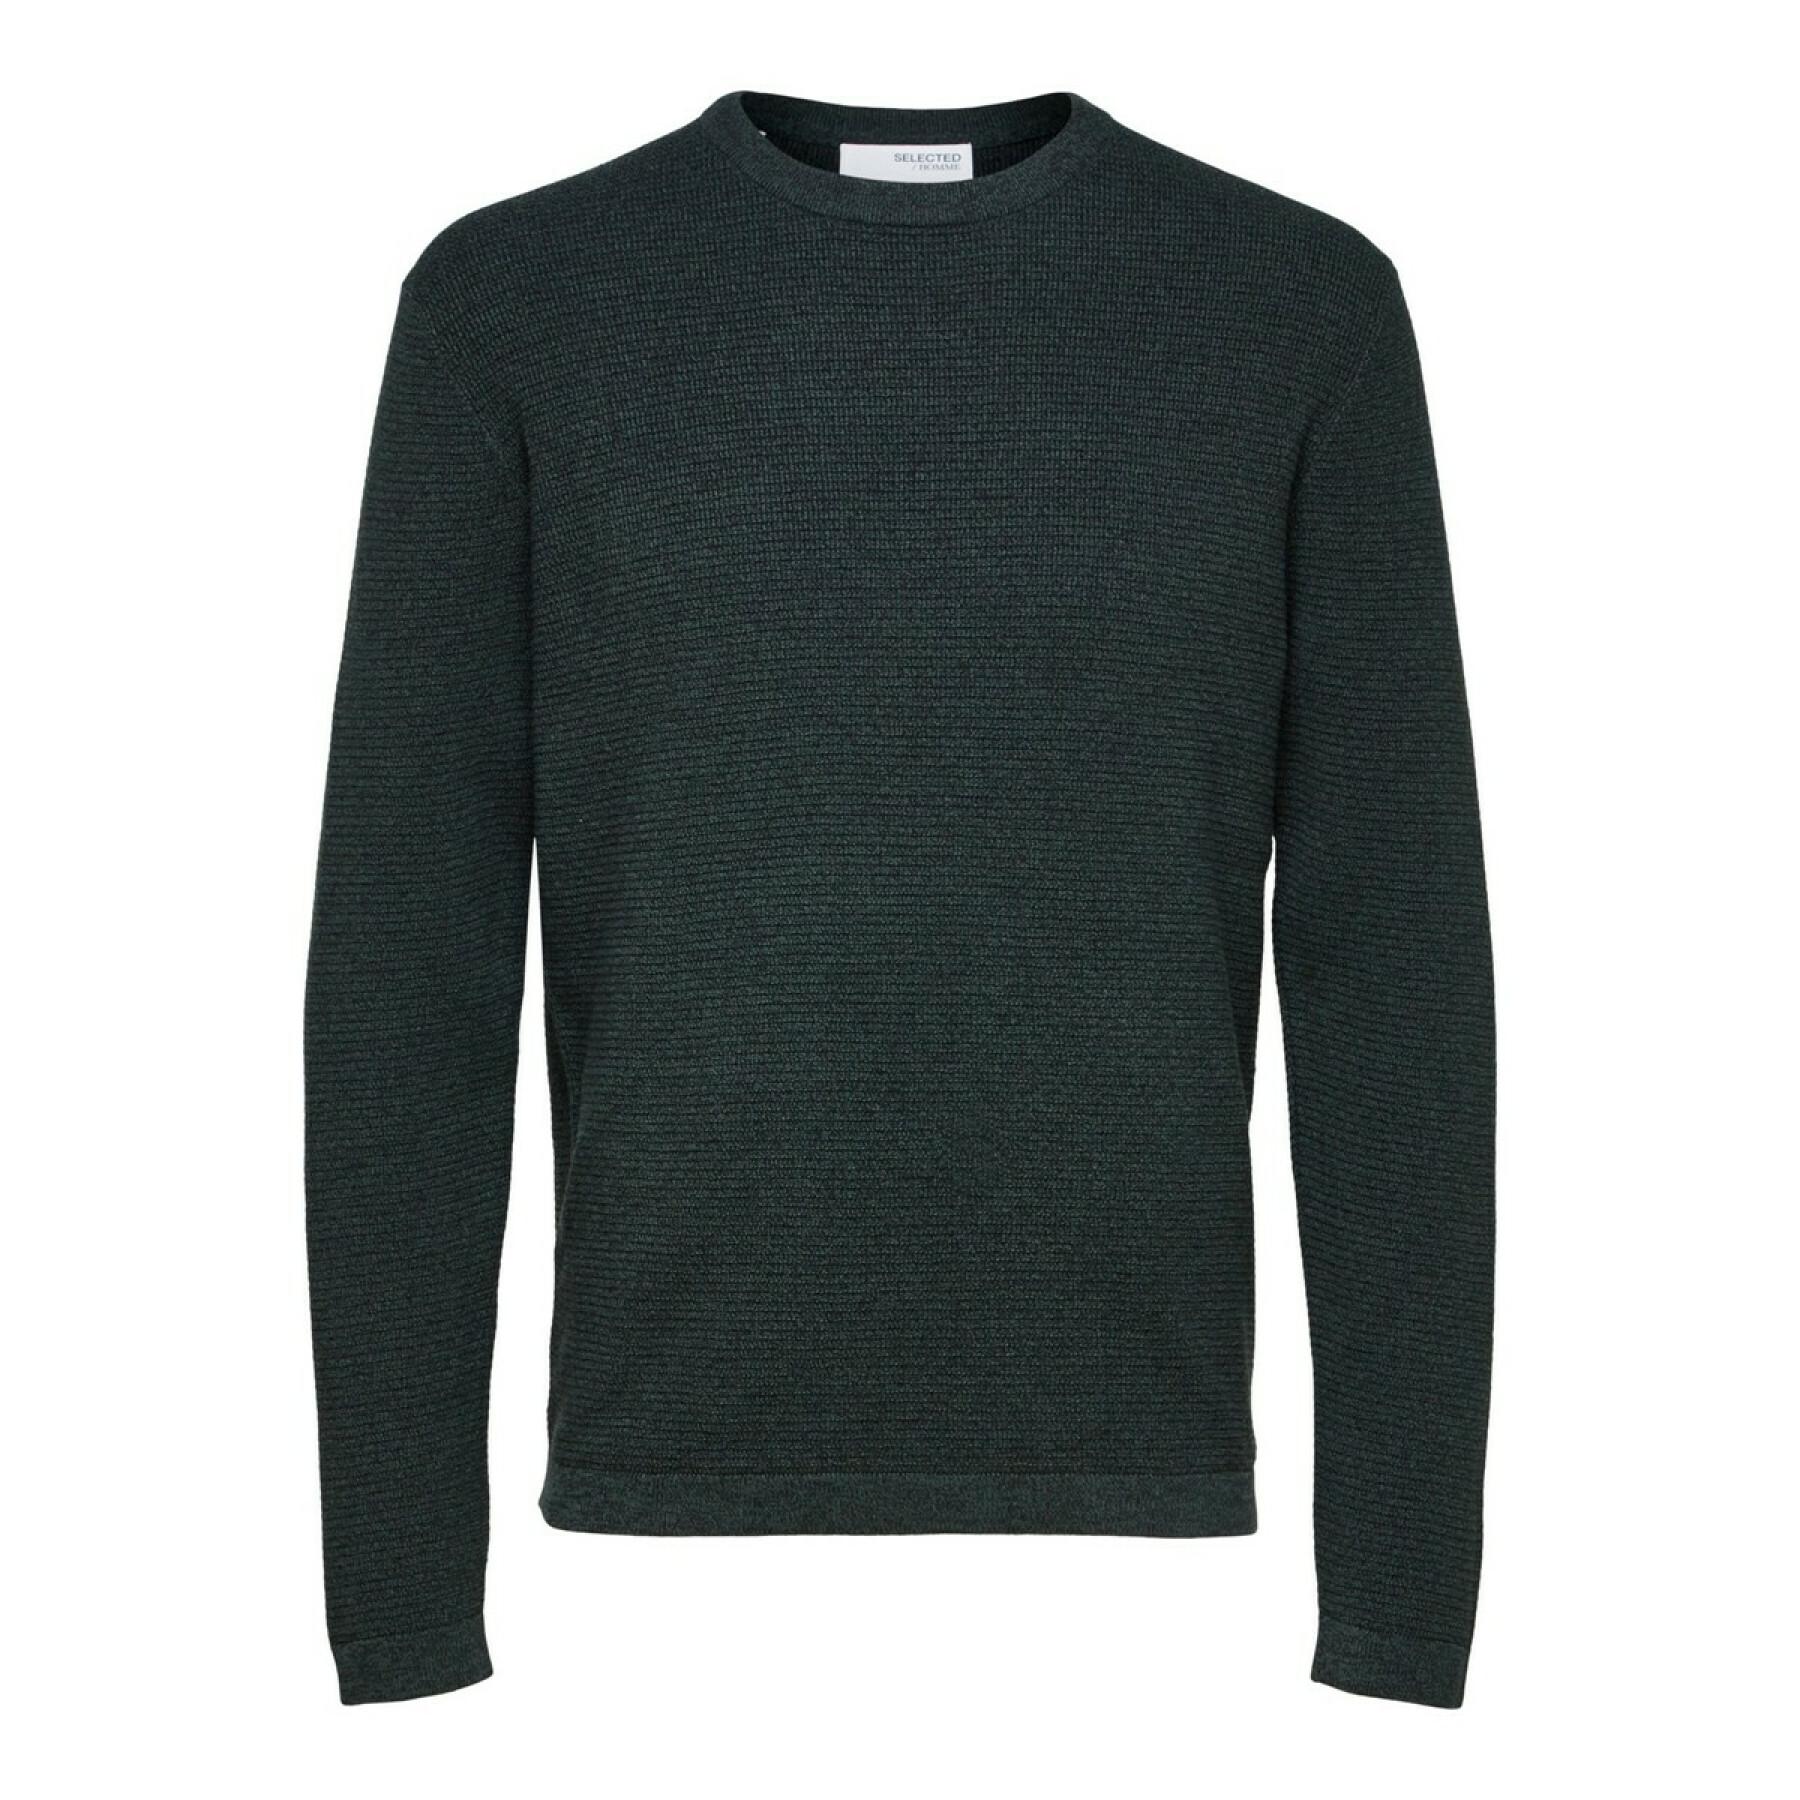 Sweater Selected Rocks manches longues Col rond